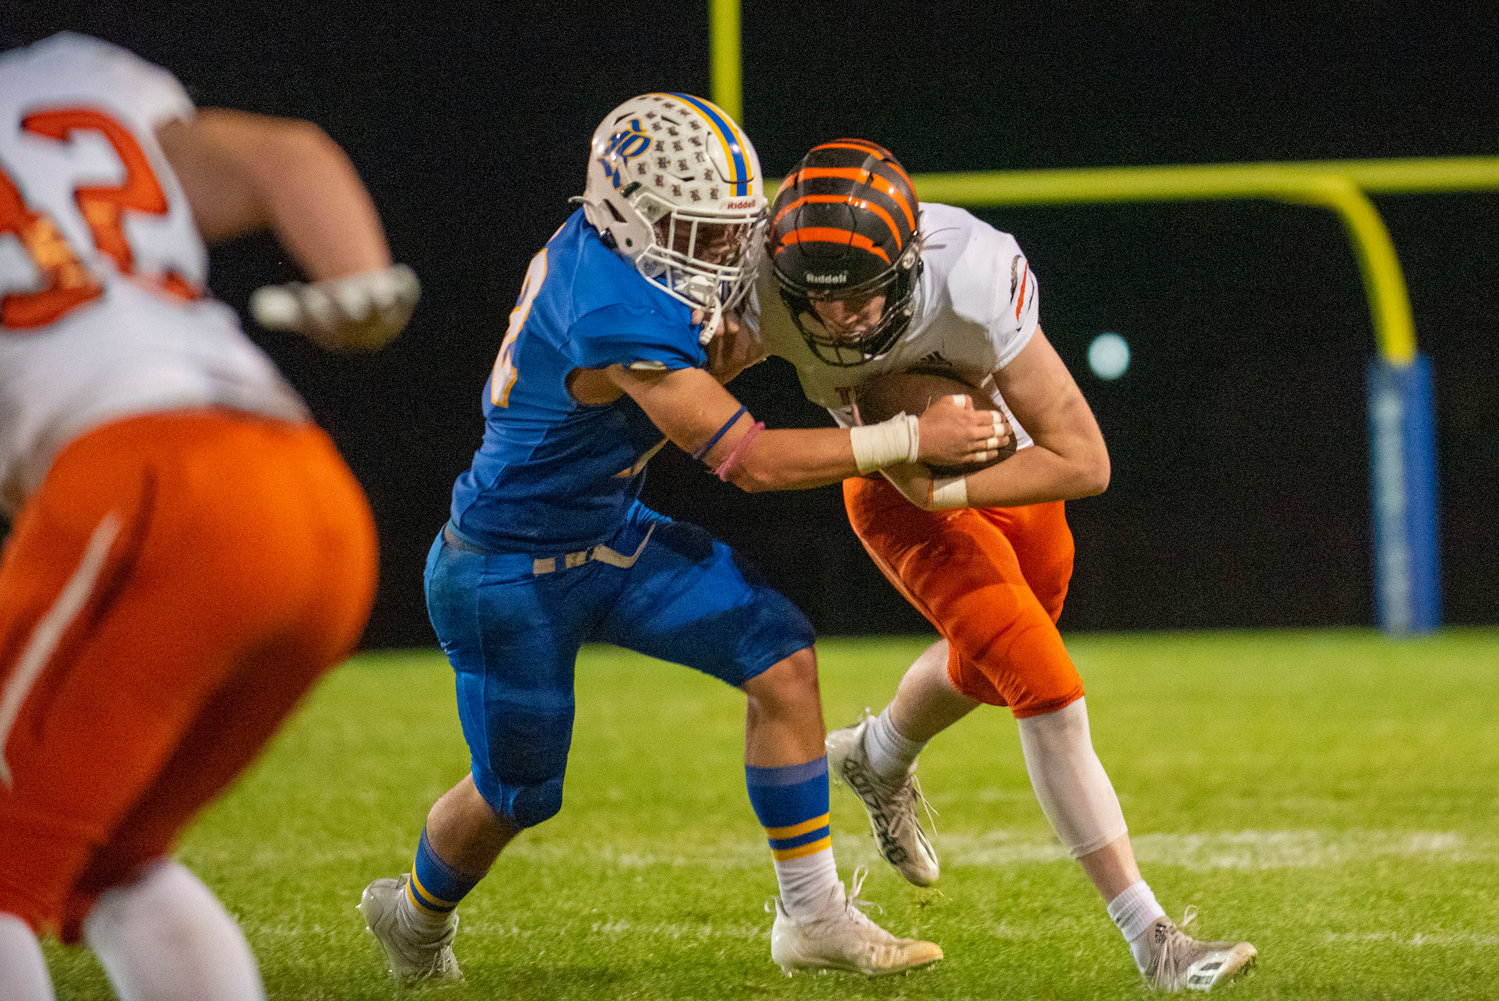 Images from the Centralia at Rochester football game on Oct. 2, 2021 at Rochester High School.